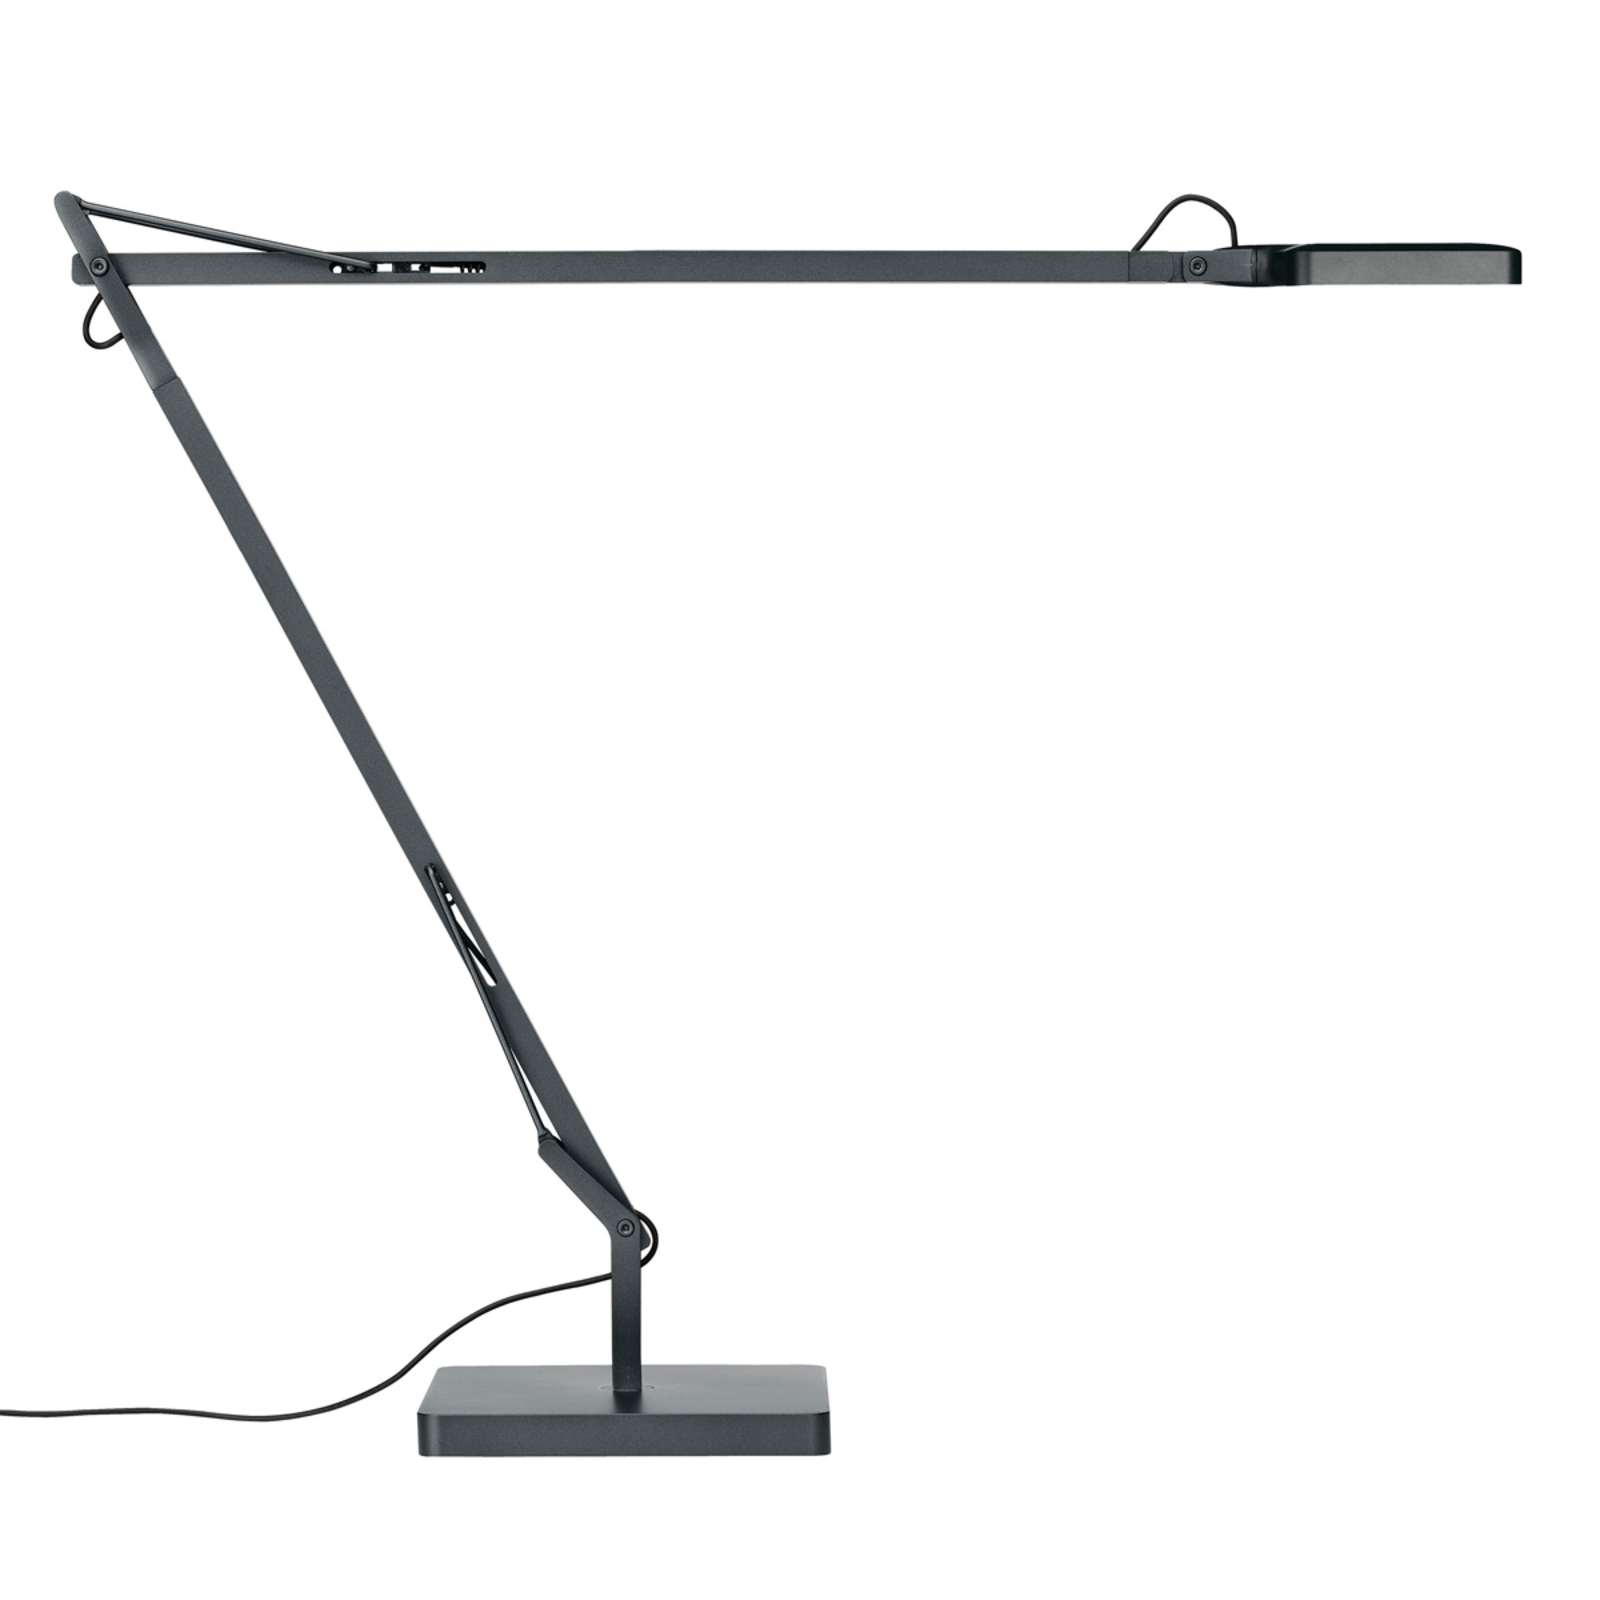 FLOS Kelvin LED table lamp in anthracite